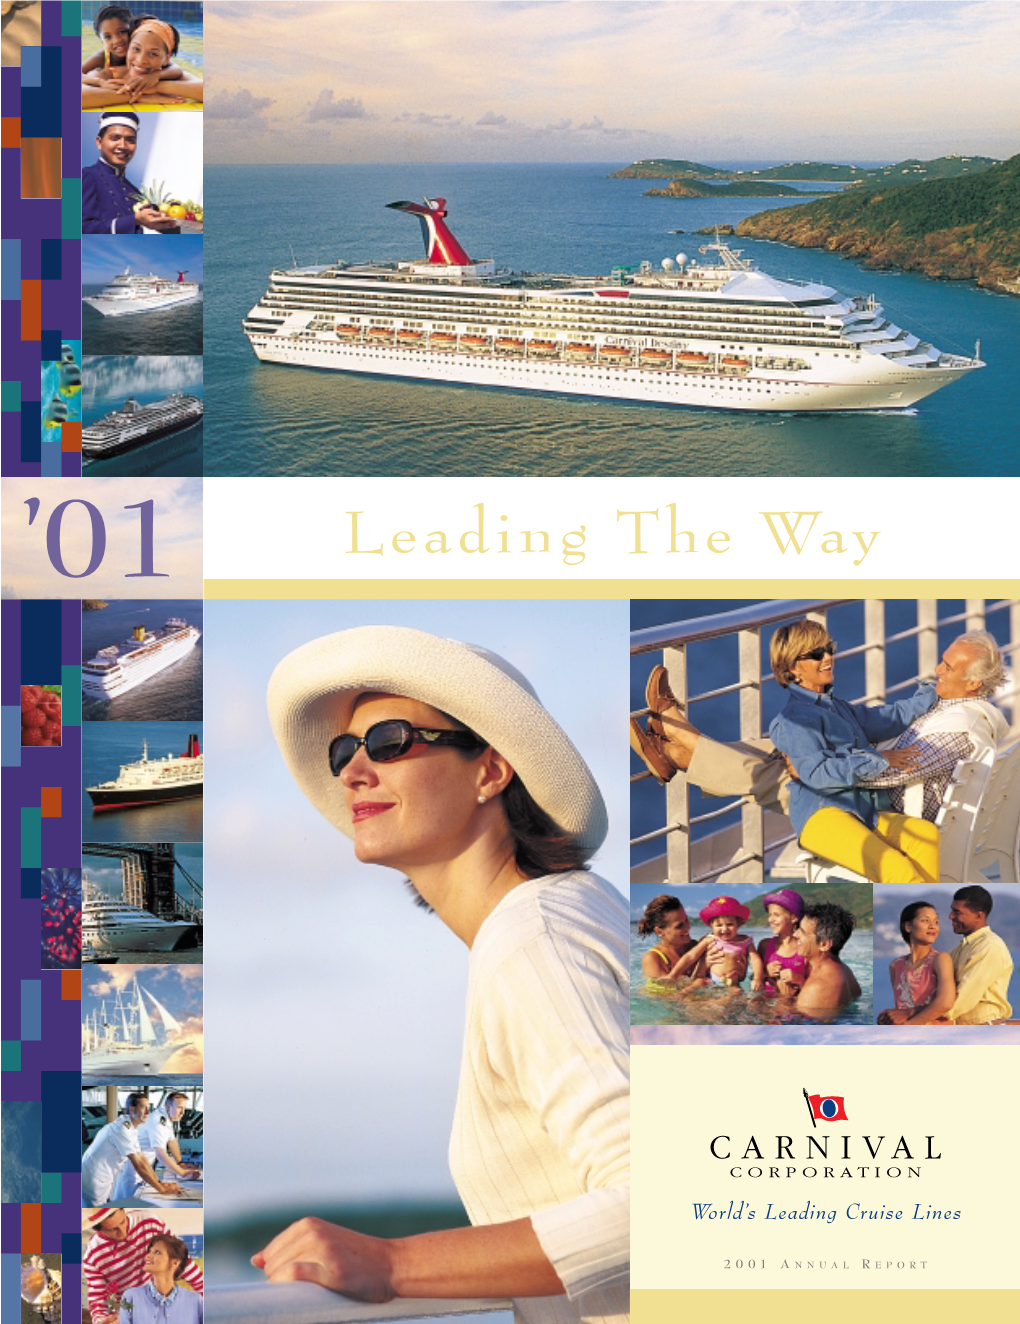 CARNIVAL CORPORATION World’S Leading Cruise Lines